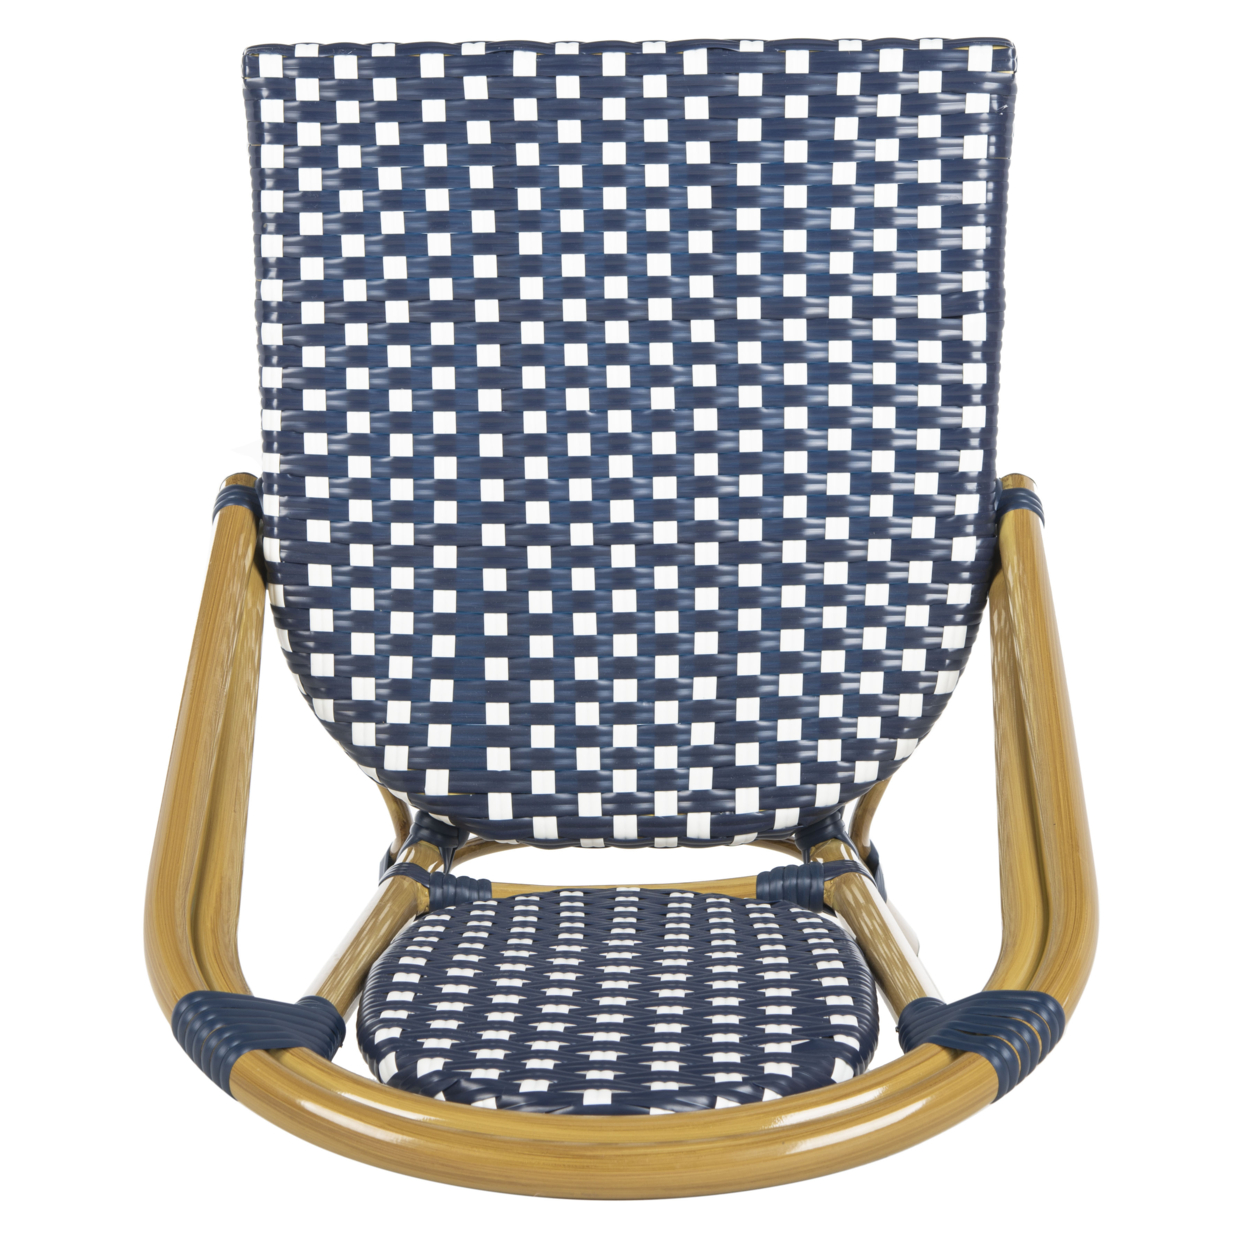 SAFAVIEH Lenda Outdoor Patio French Bistro Stackable Chair, Navy/White/Brown, Set of 2 - image 4 of 7